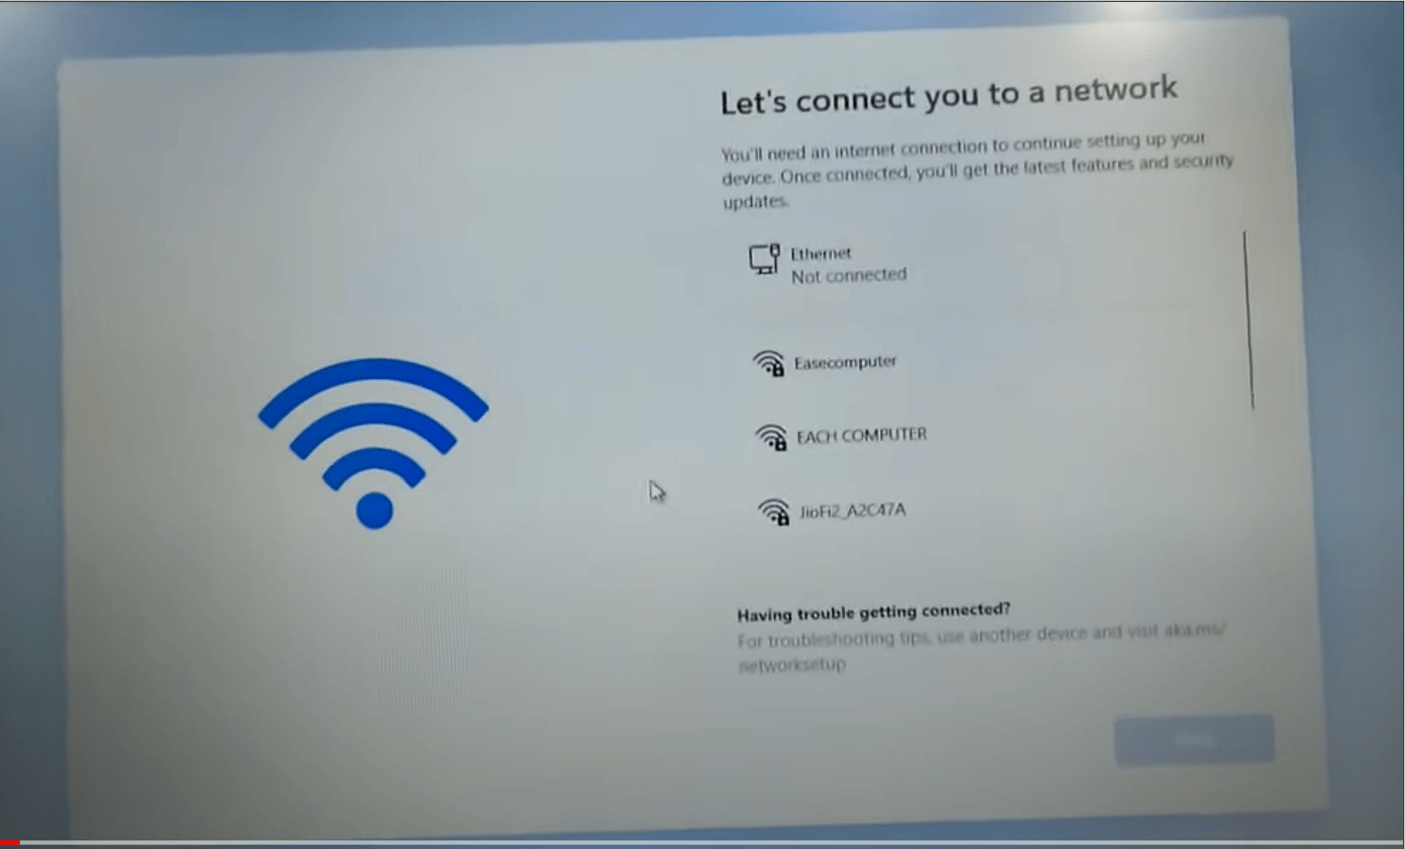 Connect to a network screen to join a WiFi network.